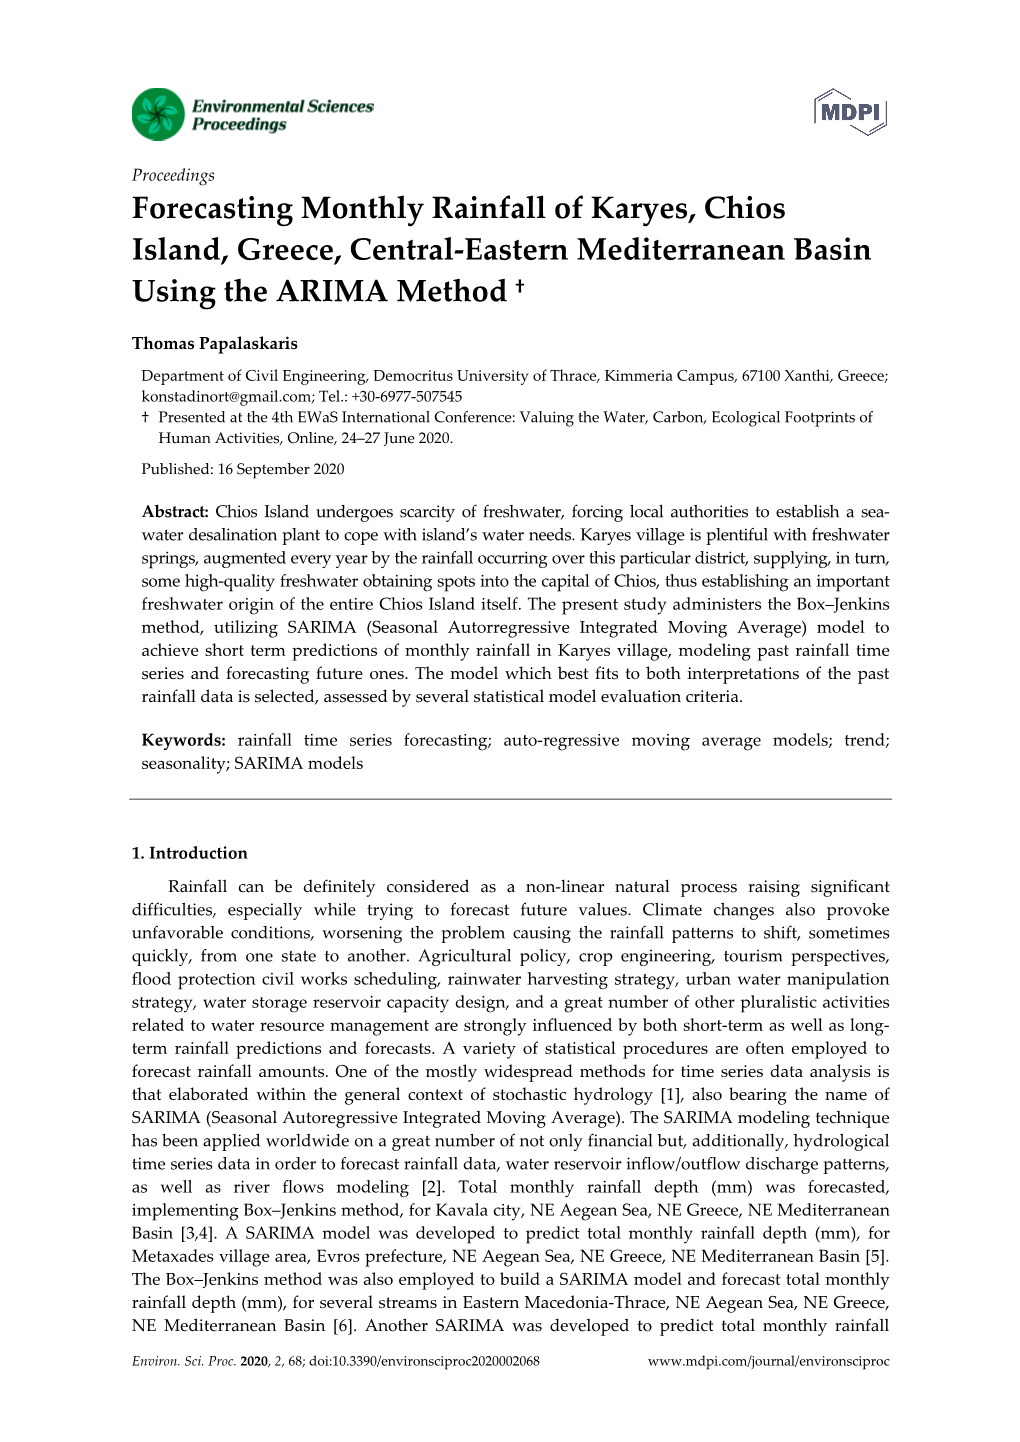 Forecasting Monthly Rainfall of Karyes, Chios Island, Greece, Central-Eastern Mediterranean Basin Using the ARIMA Method †